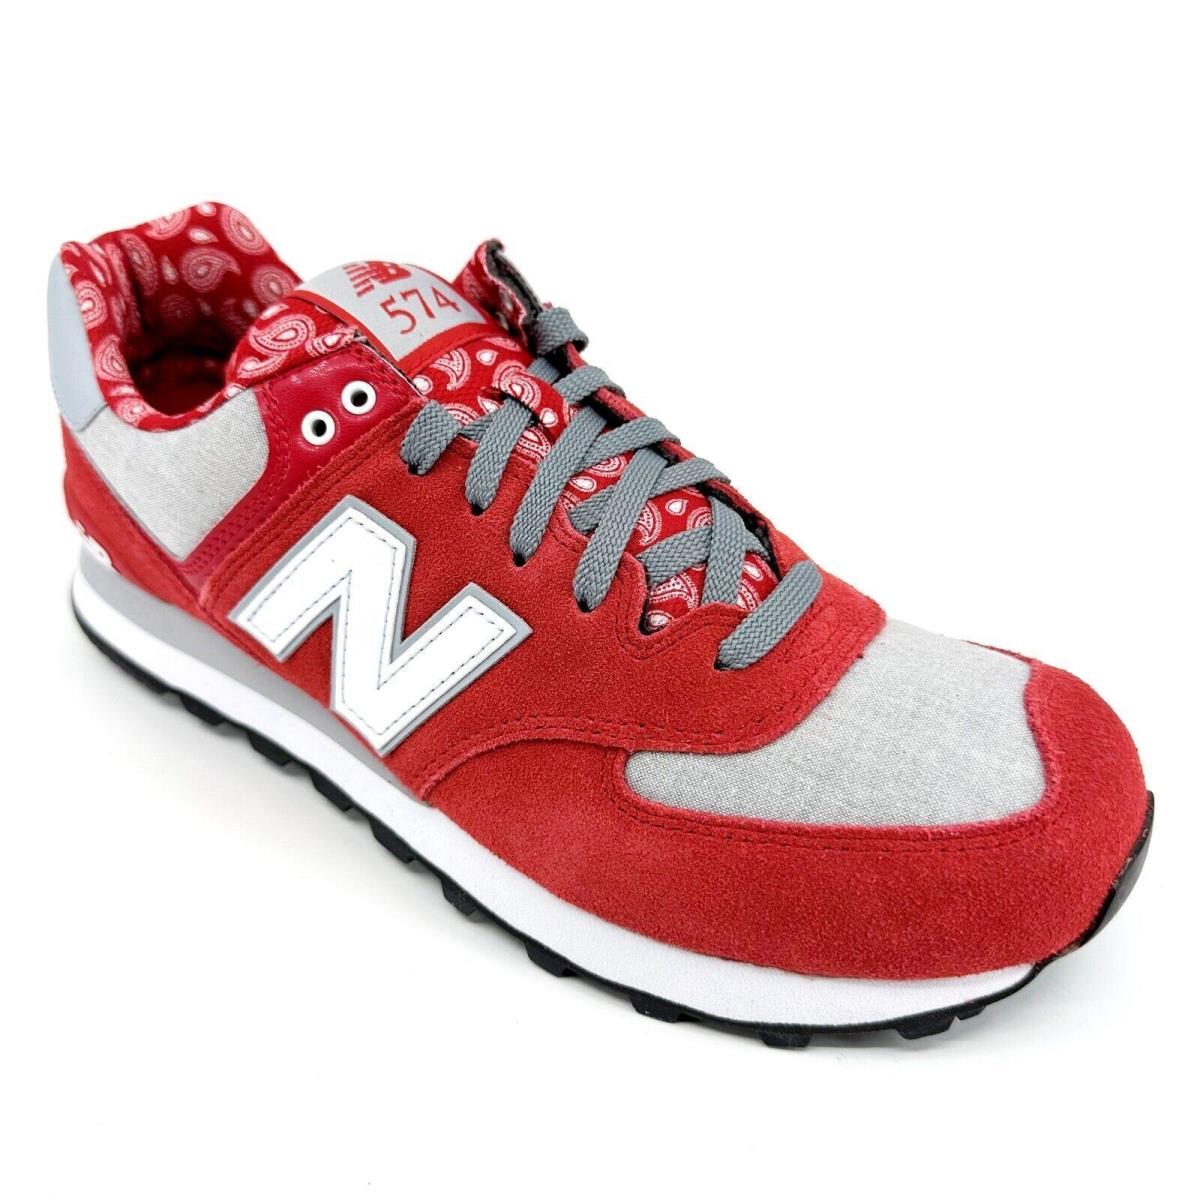 New Balance 574 Classics Paisley Red Gray Suede Mens Rare Sneakers ML574LCM